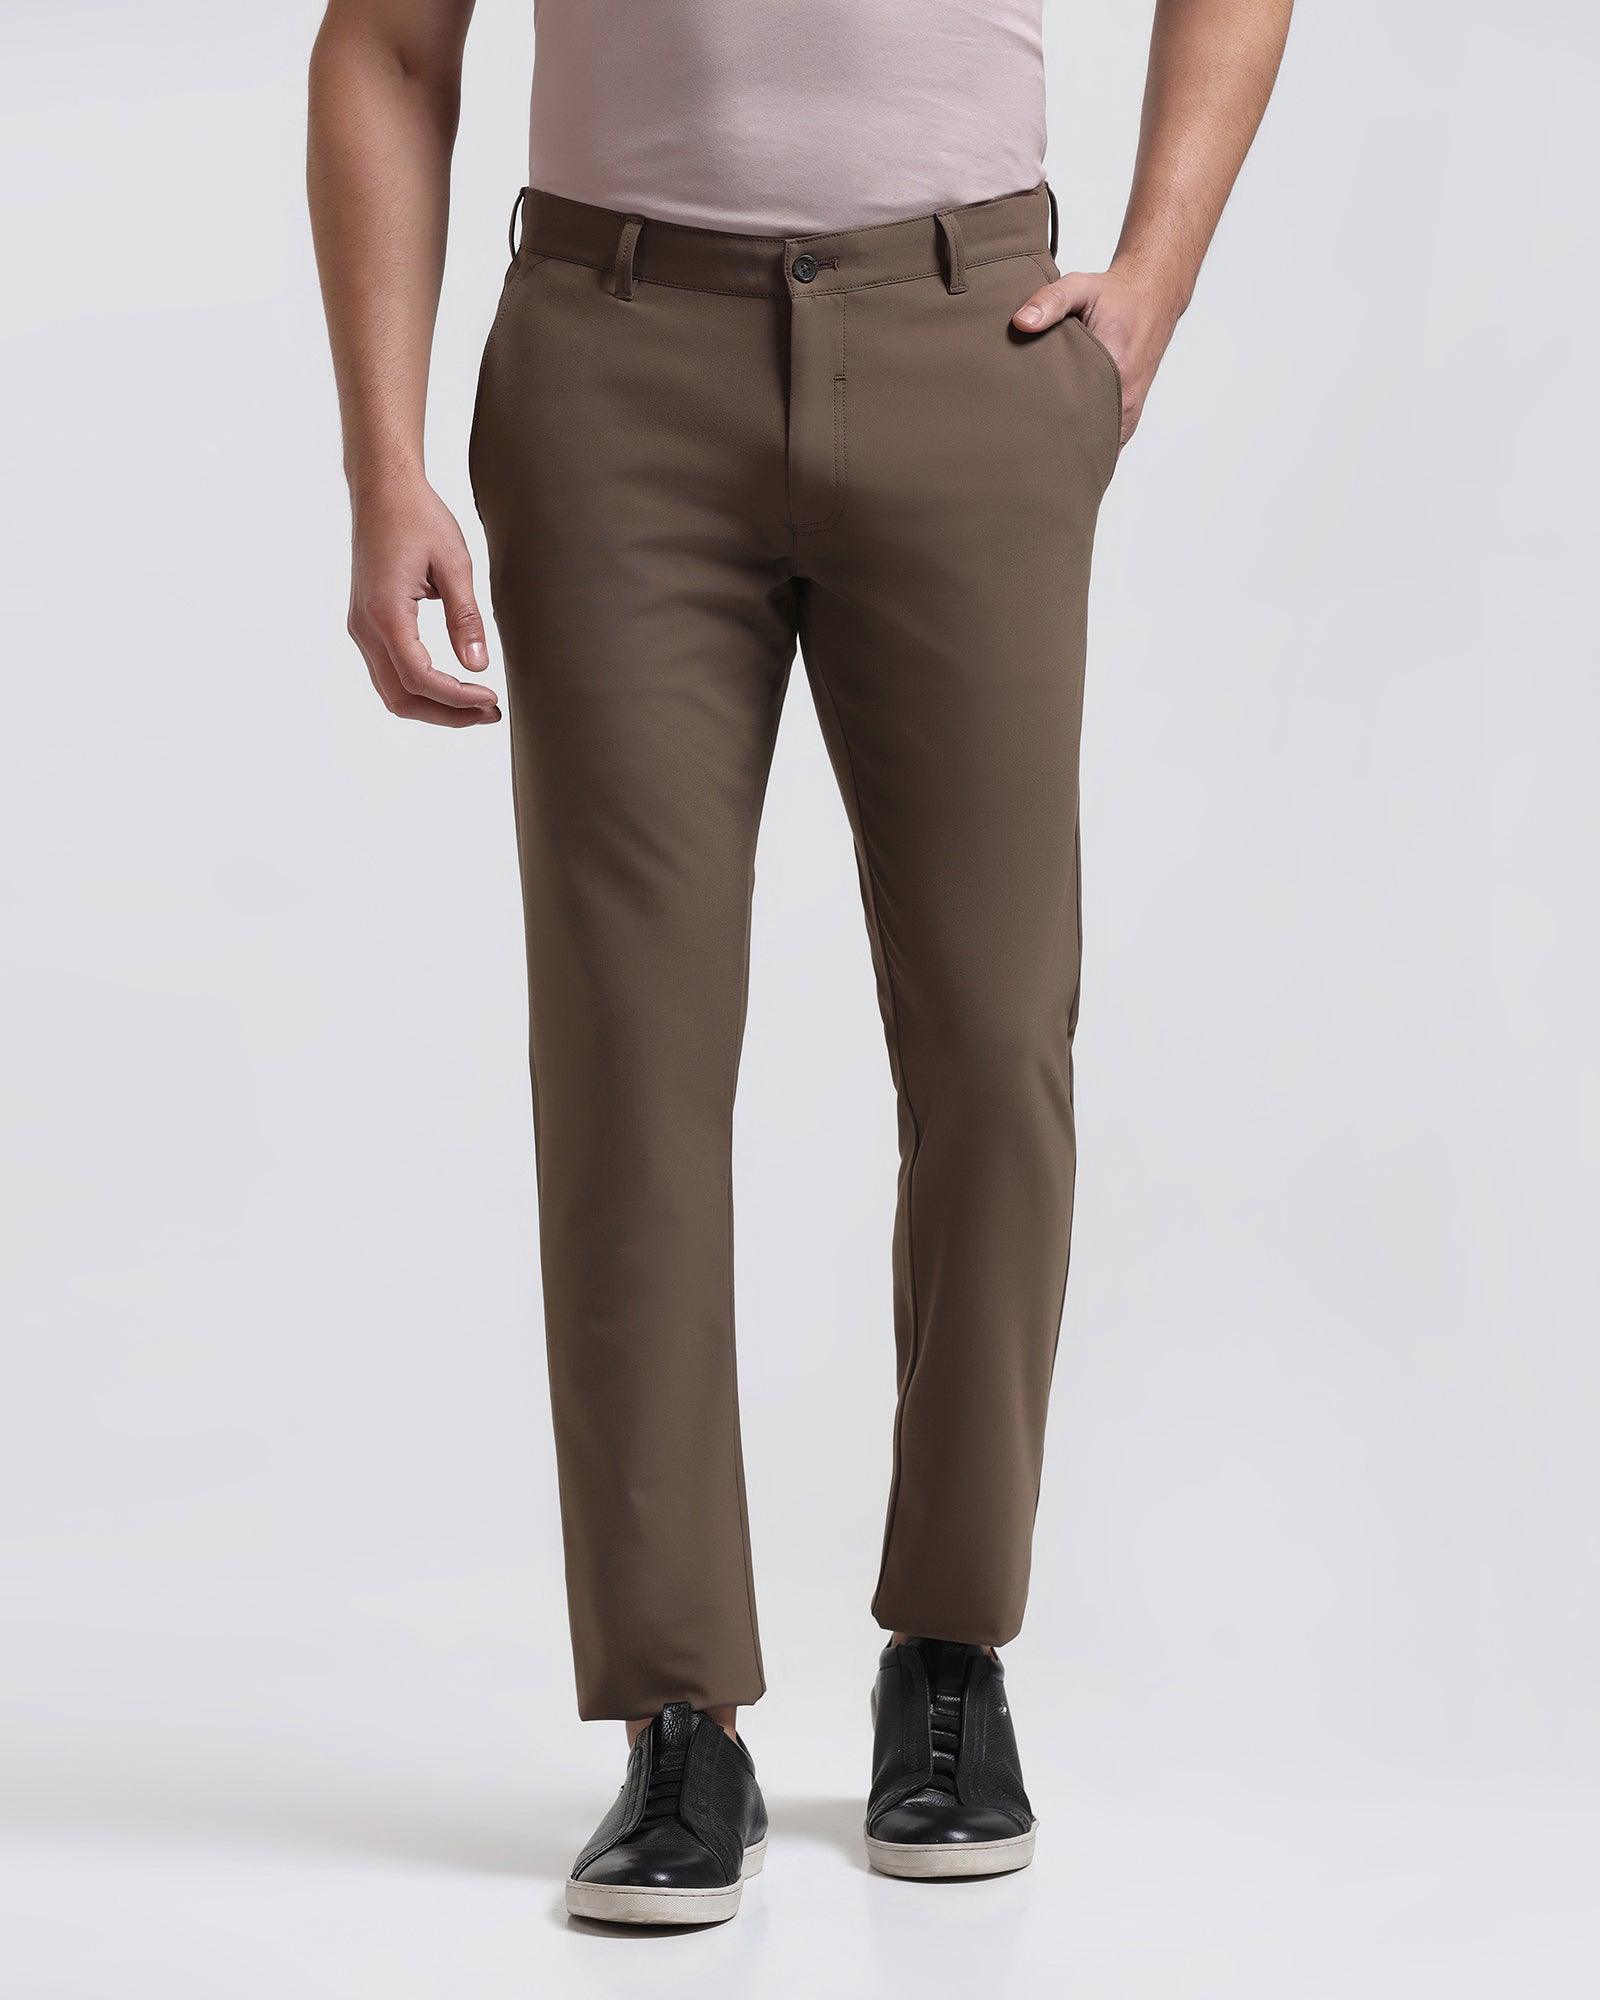 Slim Fit B-91 Casual Mouse Solid Khaki - Tulip